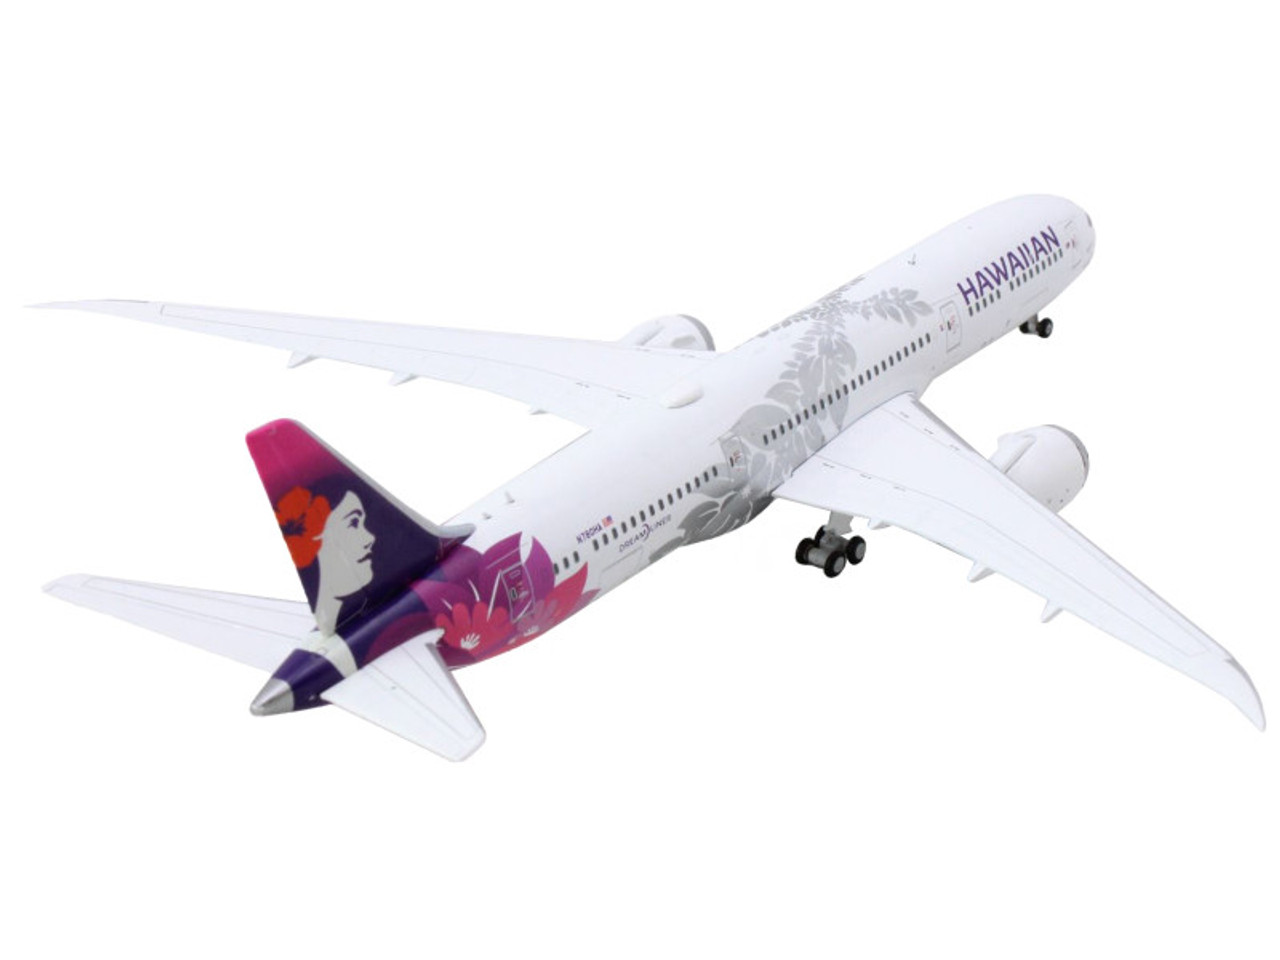 Boeing 787-9 Dreamliner Commercial Aircraft "Hawaiian Airlines" (N780HA) White with Purple Tail 1/400 Diecast Model Airplane by GeminiJets